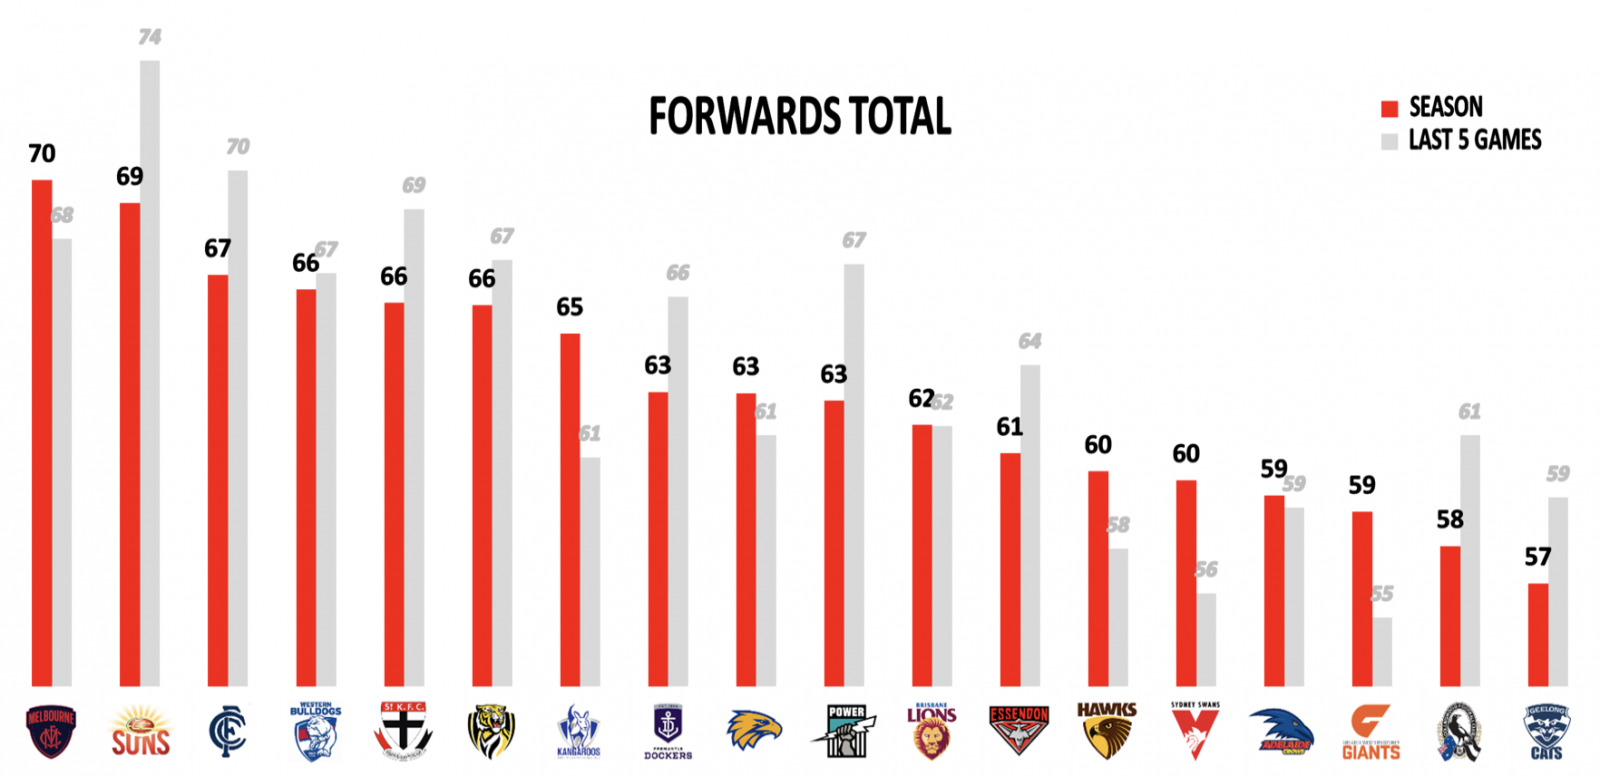 Forwards points against